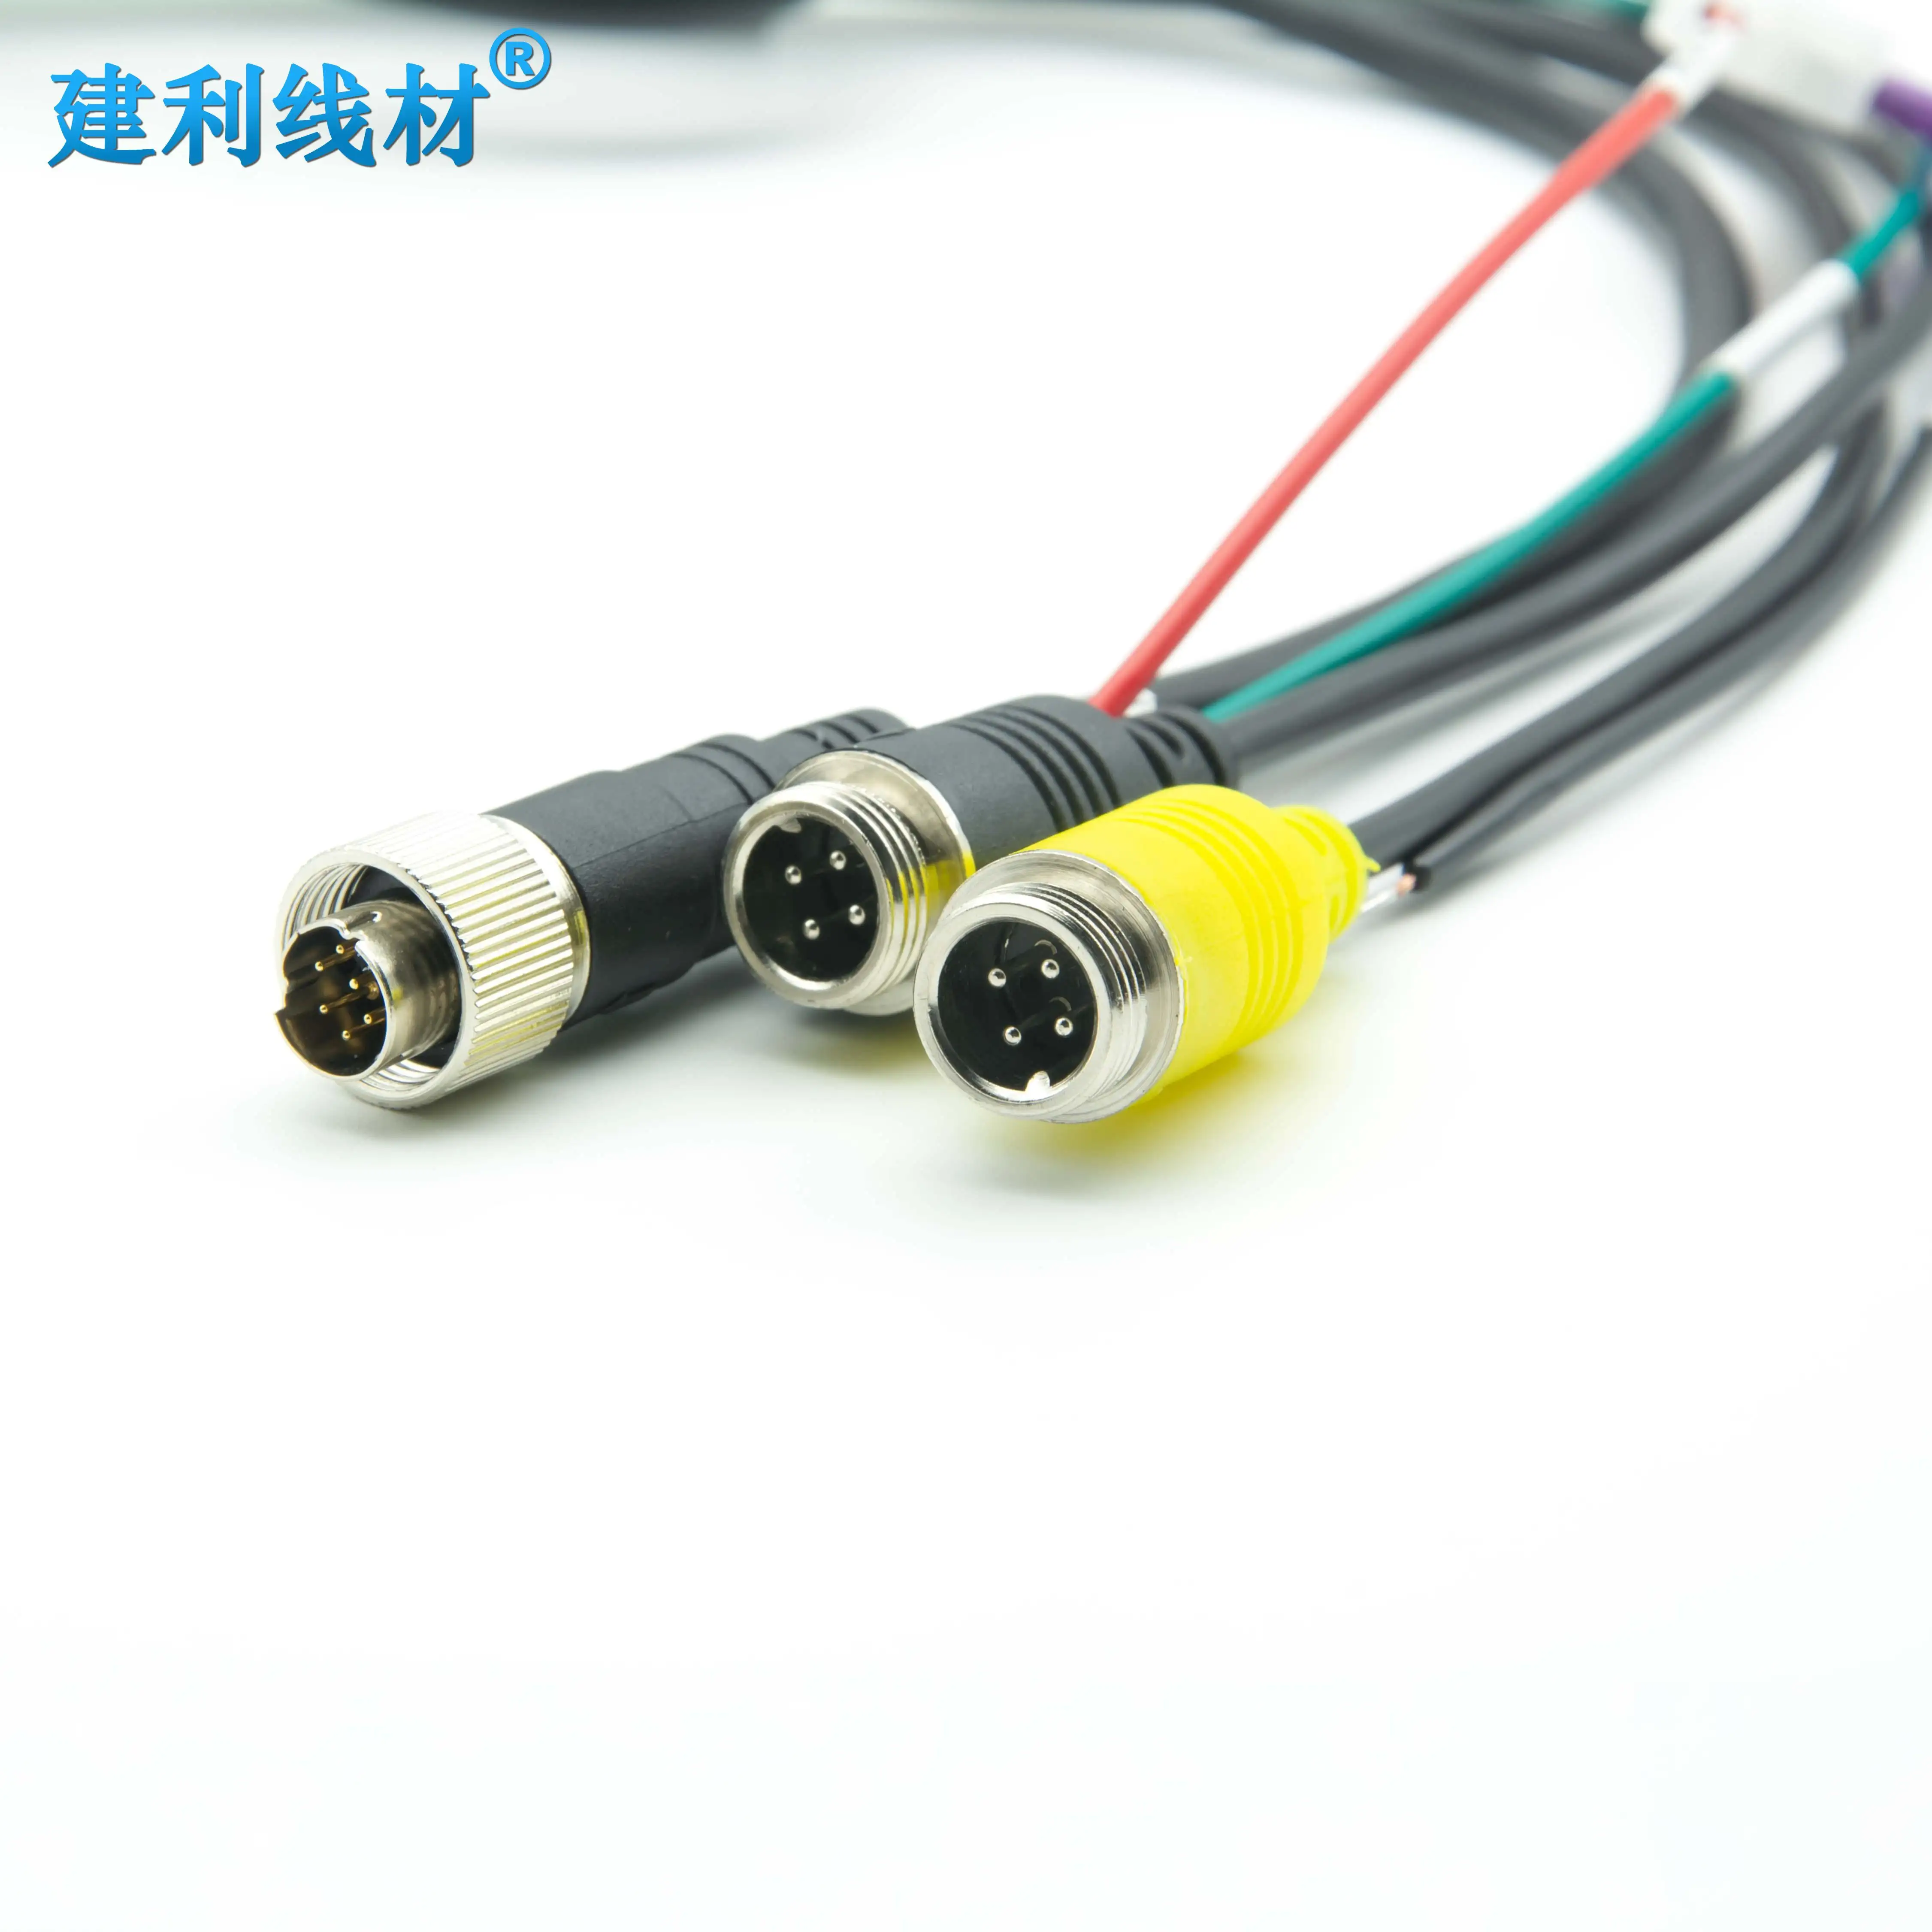 8Pin New S-Video to Twins 4Pin Aviation Cable for Vehicle Camera System - Multi-channel Transmission  Noise-Free Connectivity